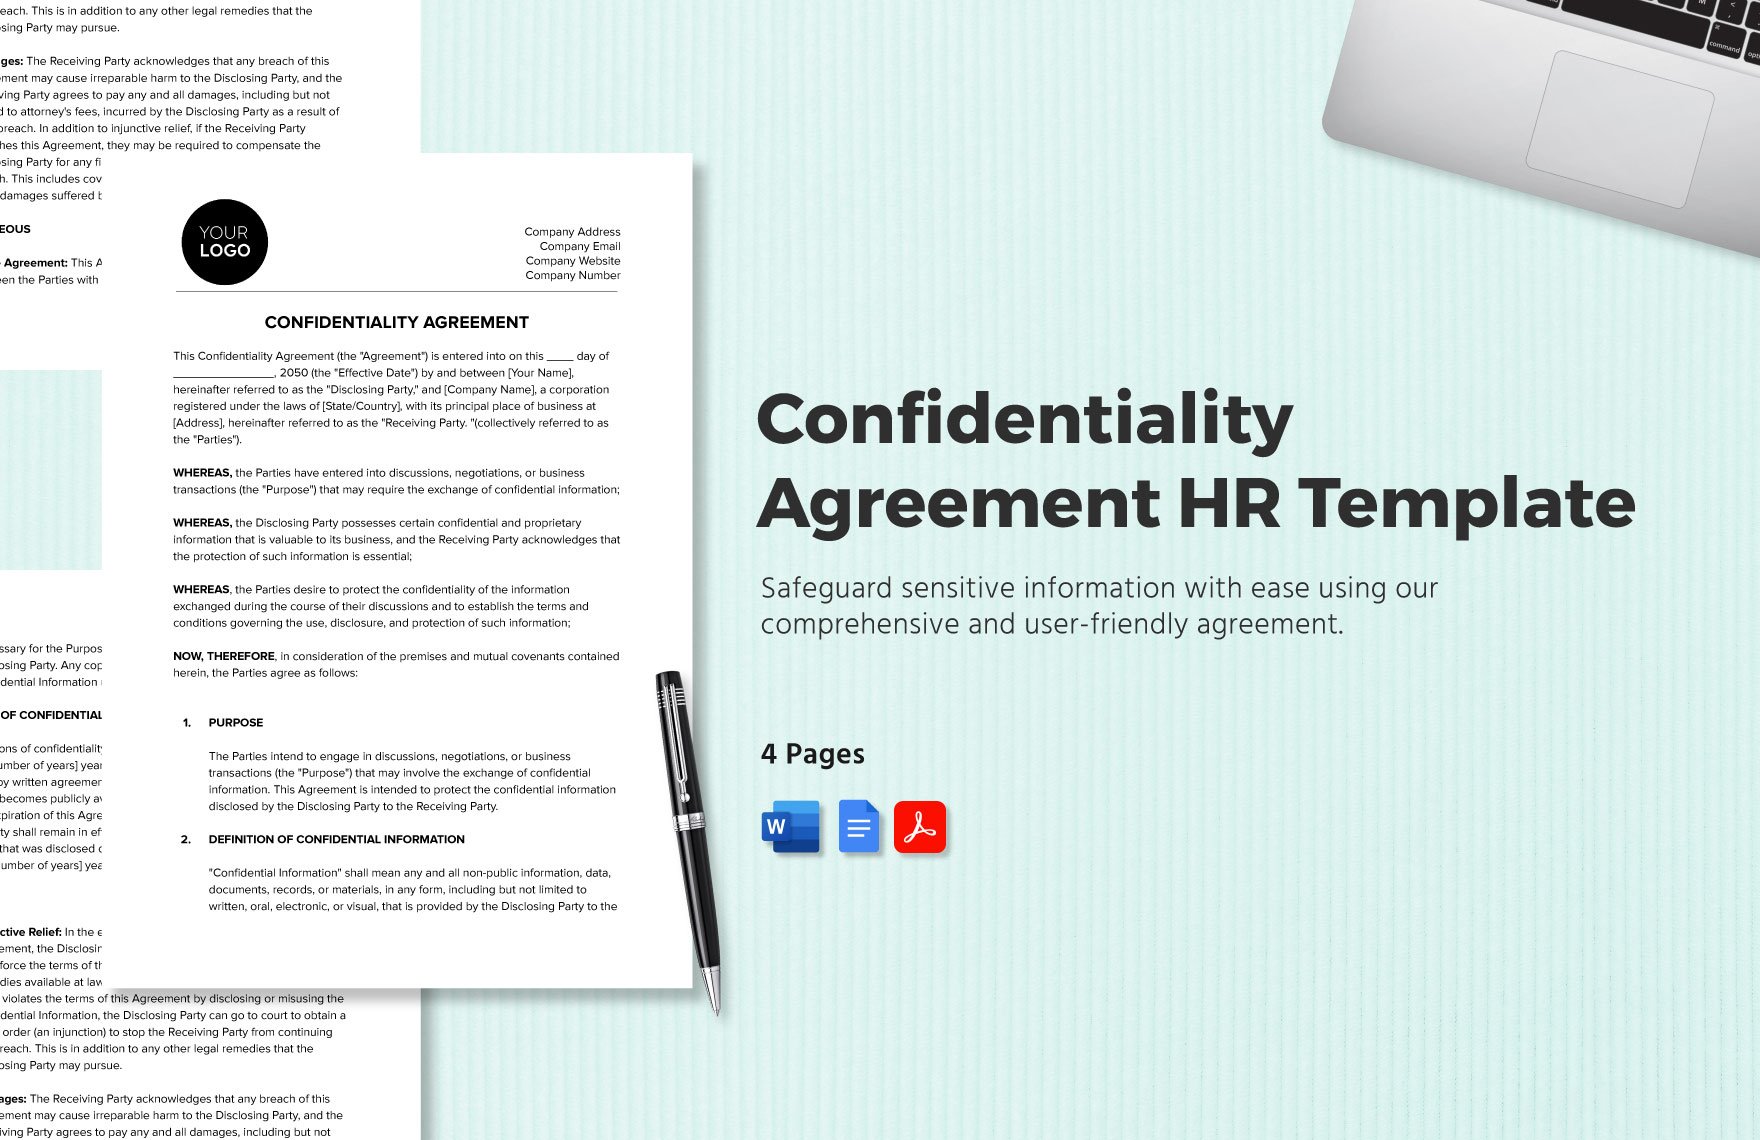 Confidentiality Agreement HR Template